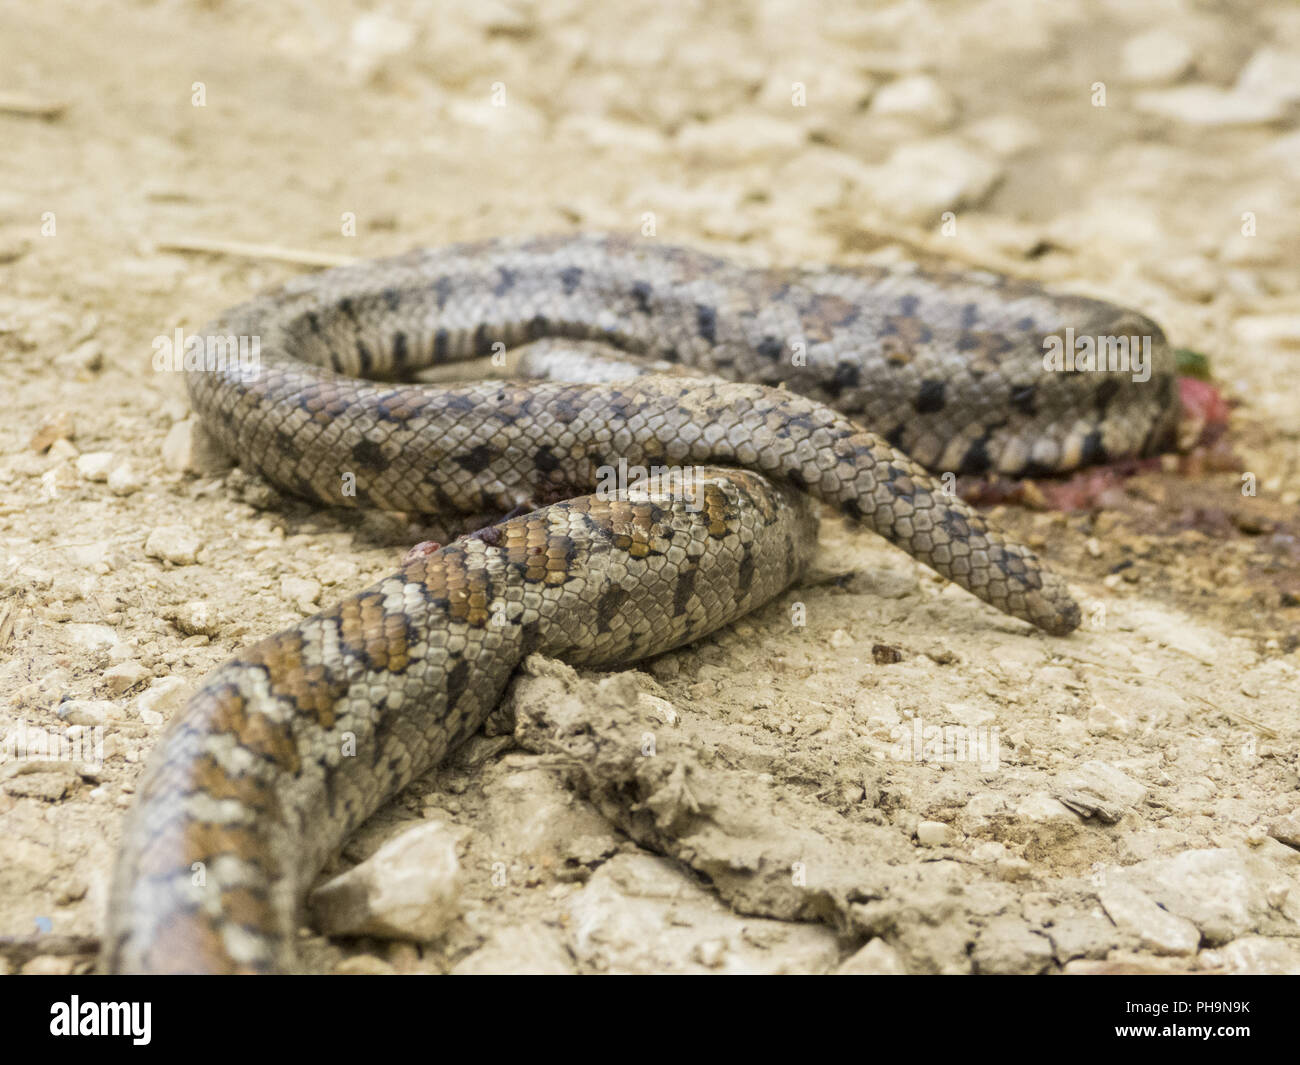 Leopard snake is lying in the sand Stock Photo